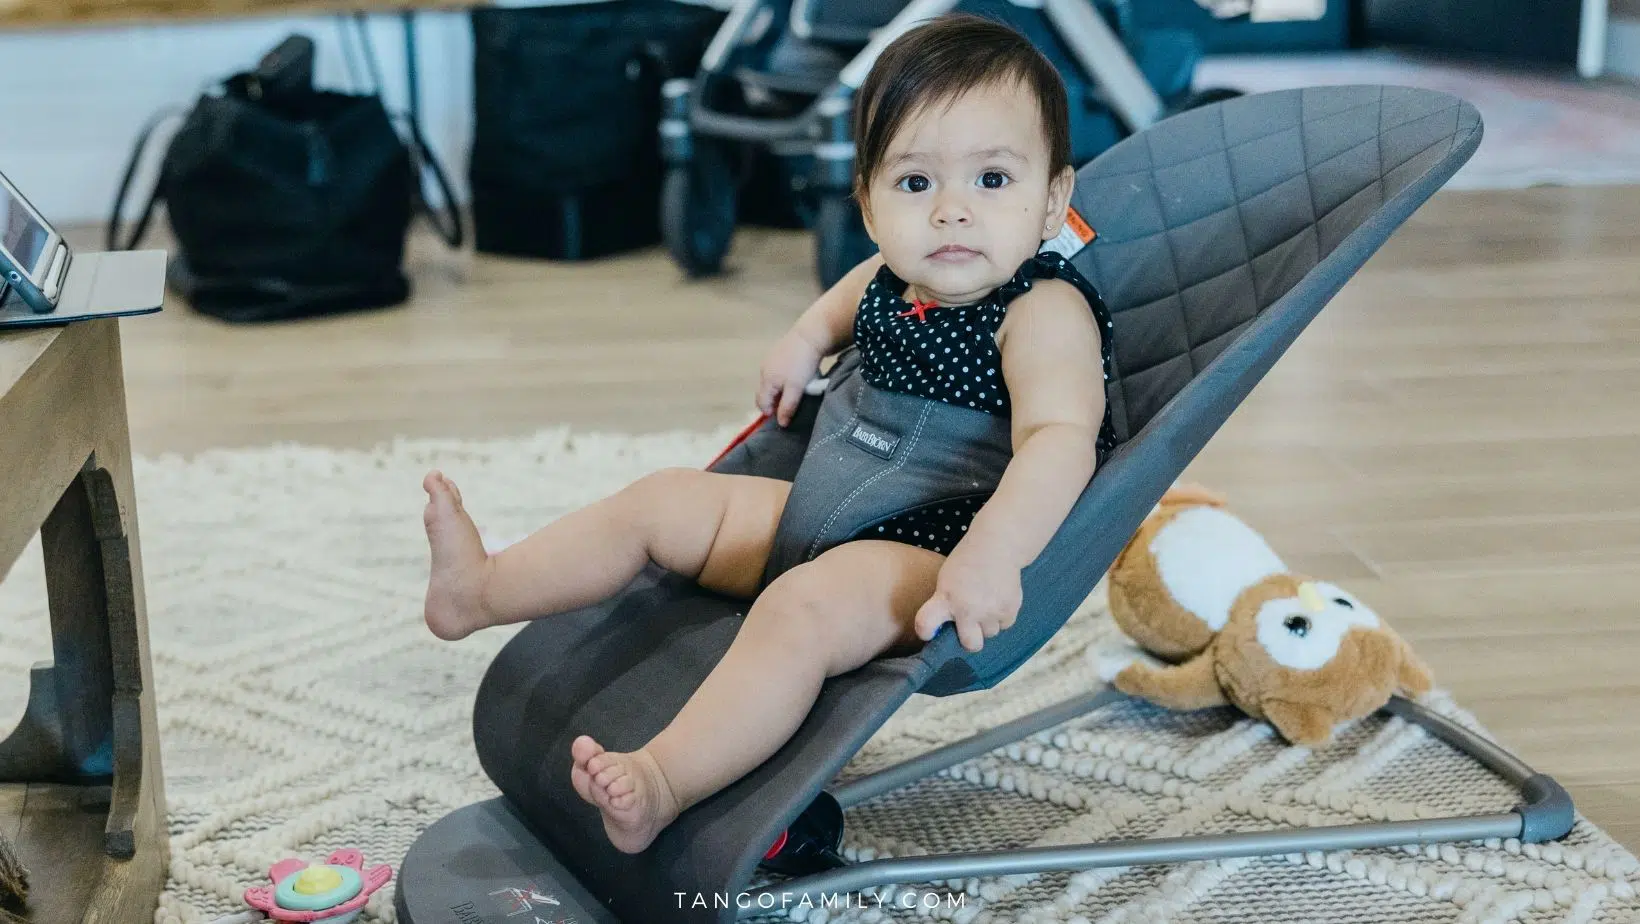 Top 10 Best Baby Bouncers and Rockers 2022